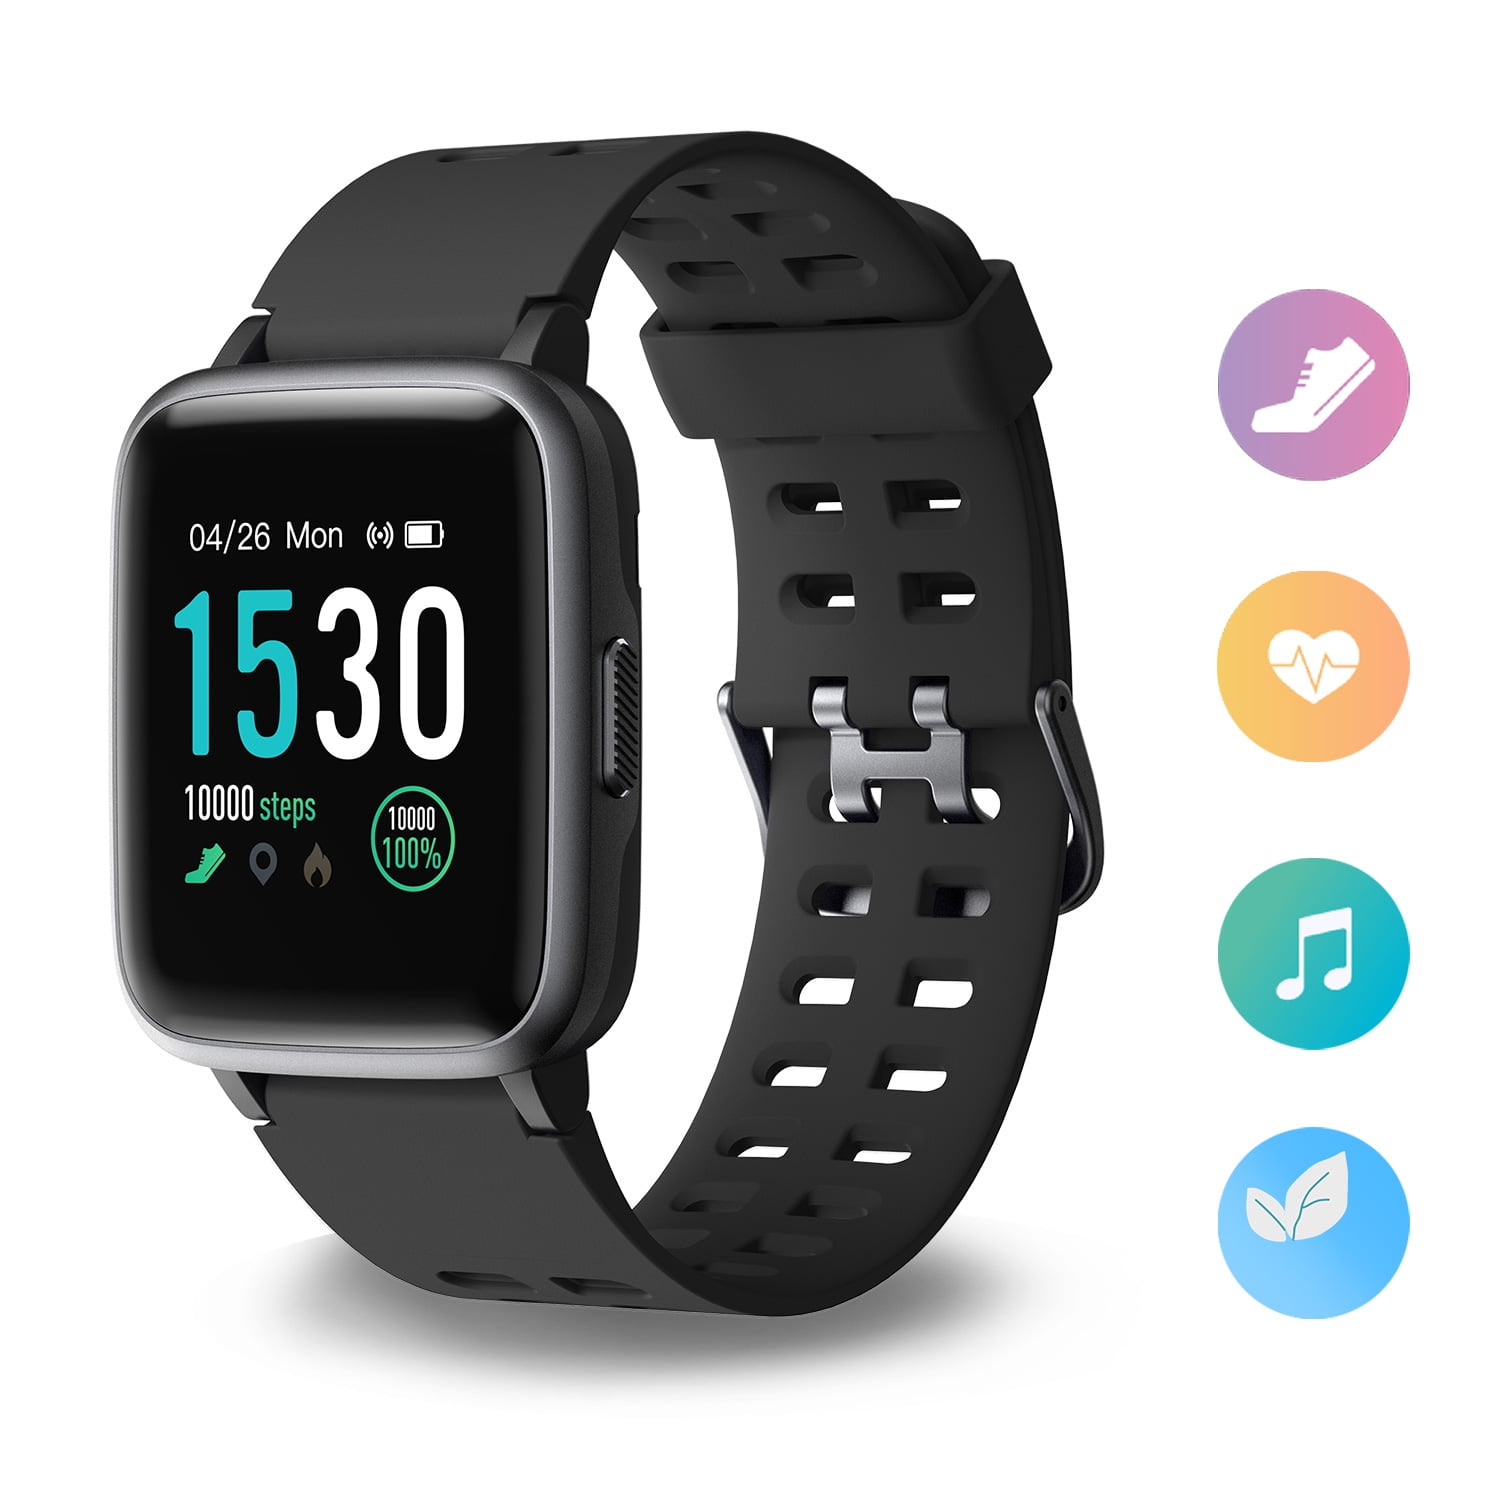 Jumper Fitness Watch, Smart Watch IP68 Waterproof Activity Tracker with Heart Rate Monitor, Sleep Monitor, Pedometer, Calorie Counter, Fitness Watches for Women, Black - Walmart.com